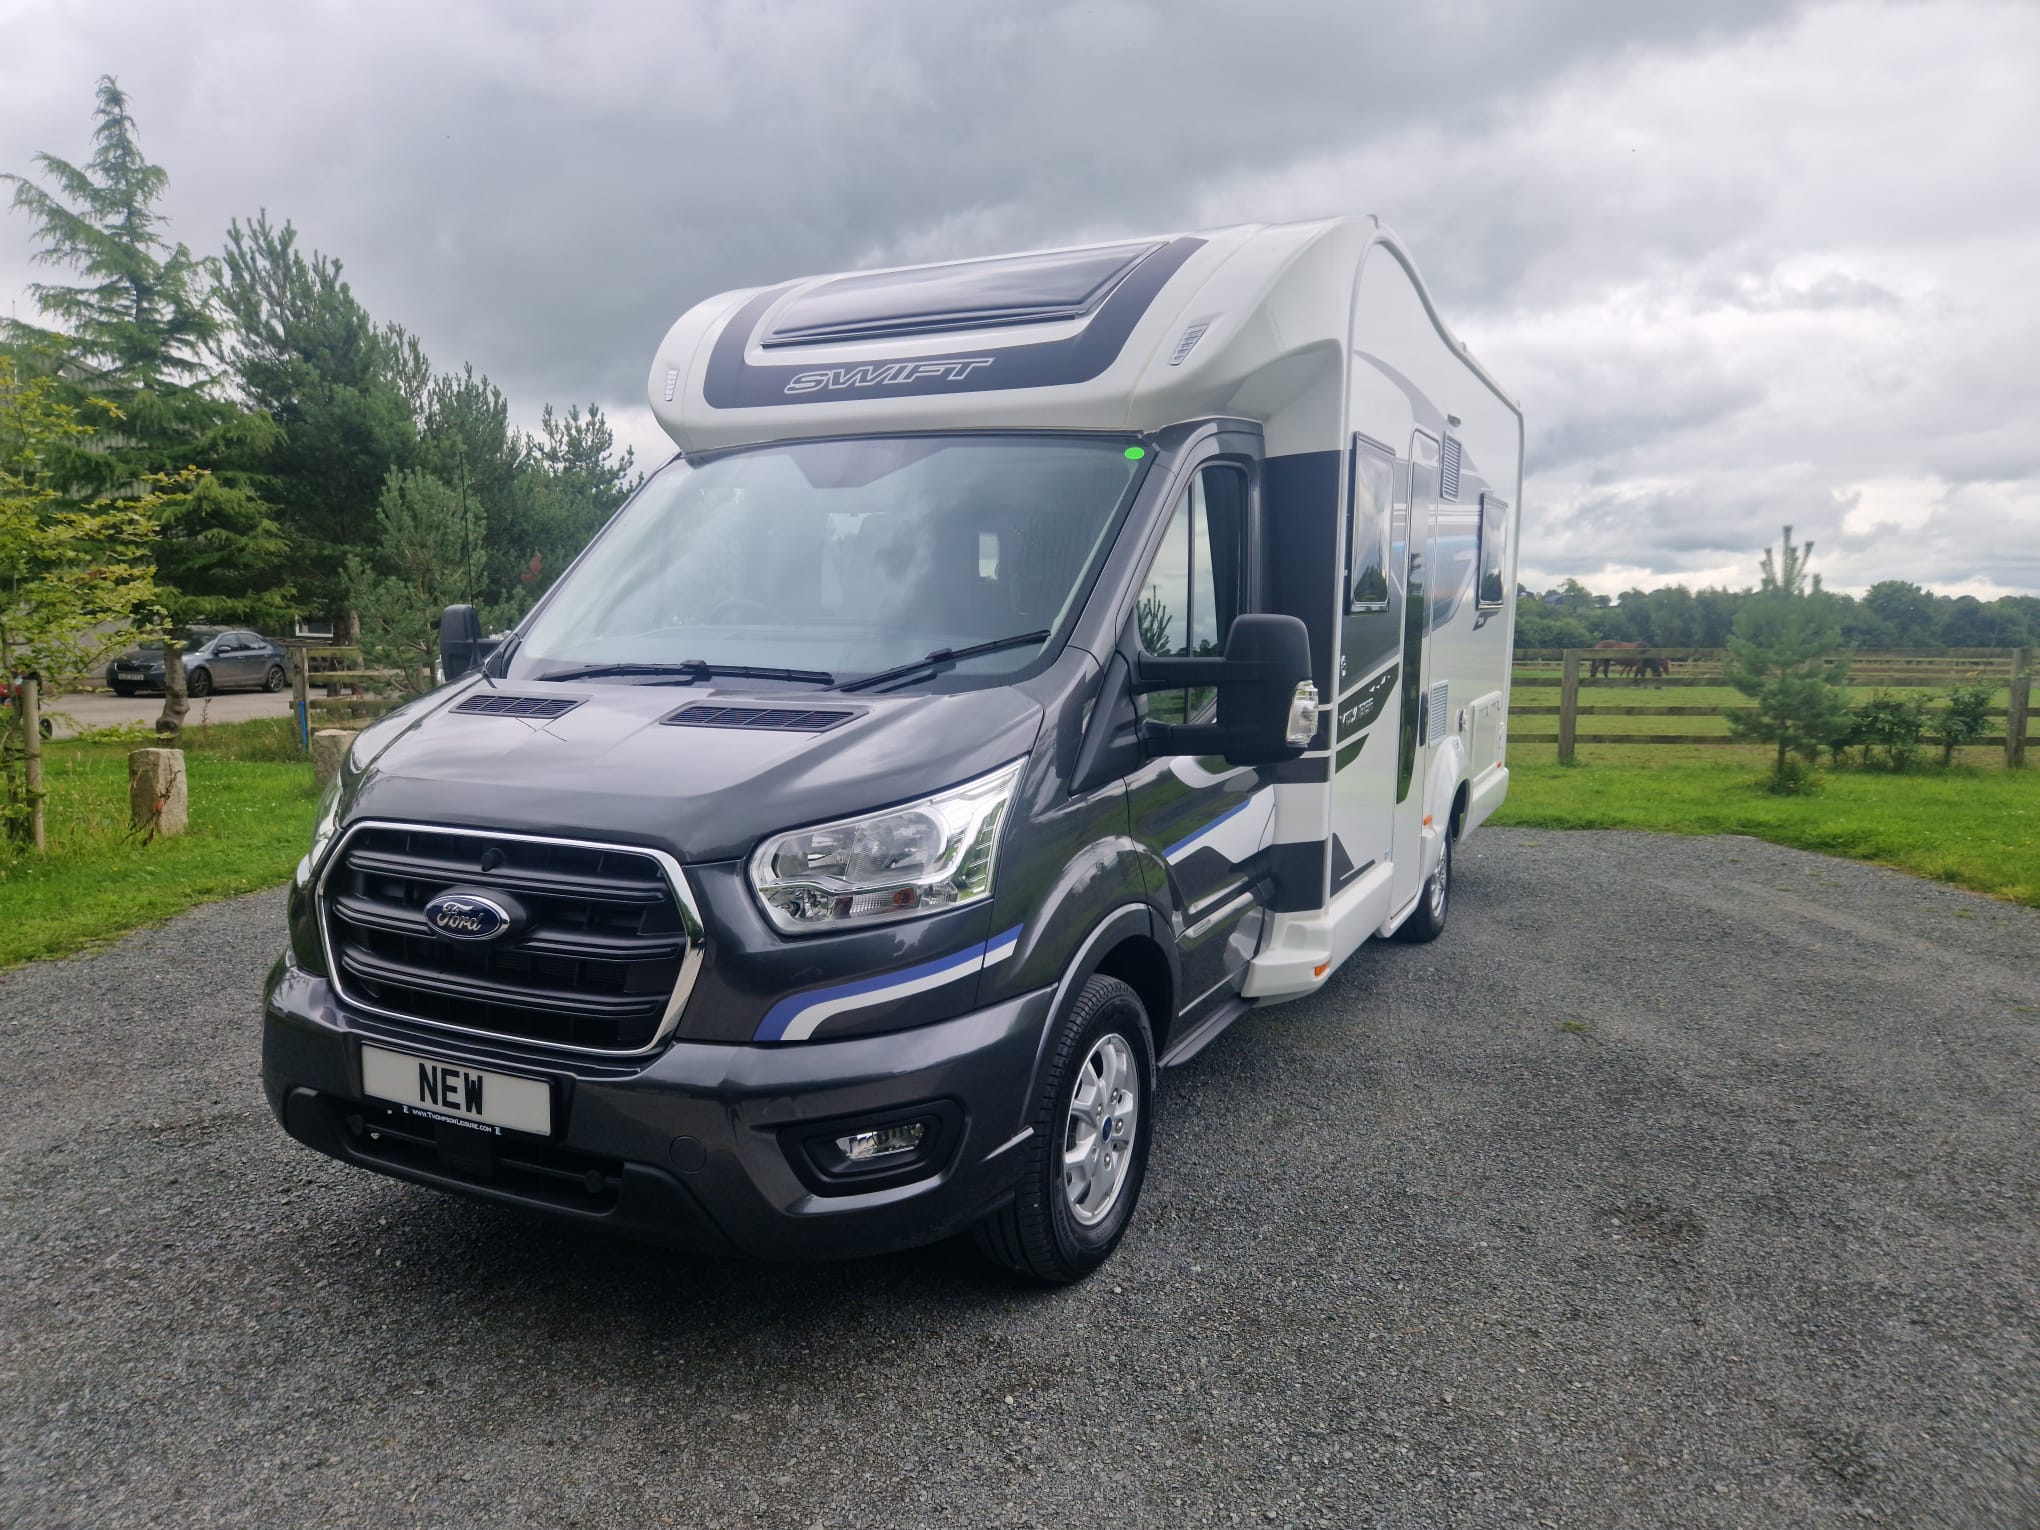 NEW Swift Voyager 564